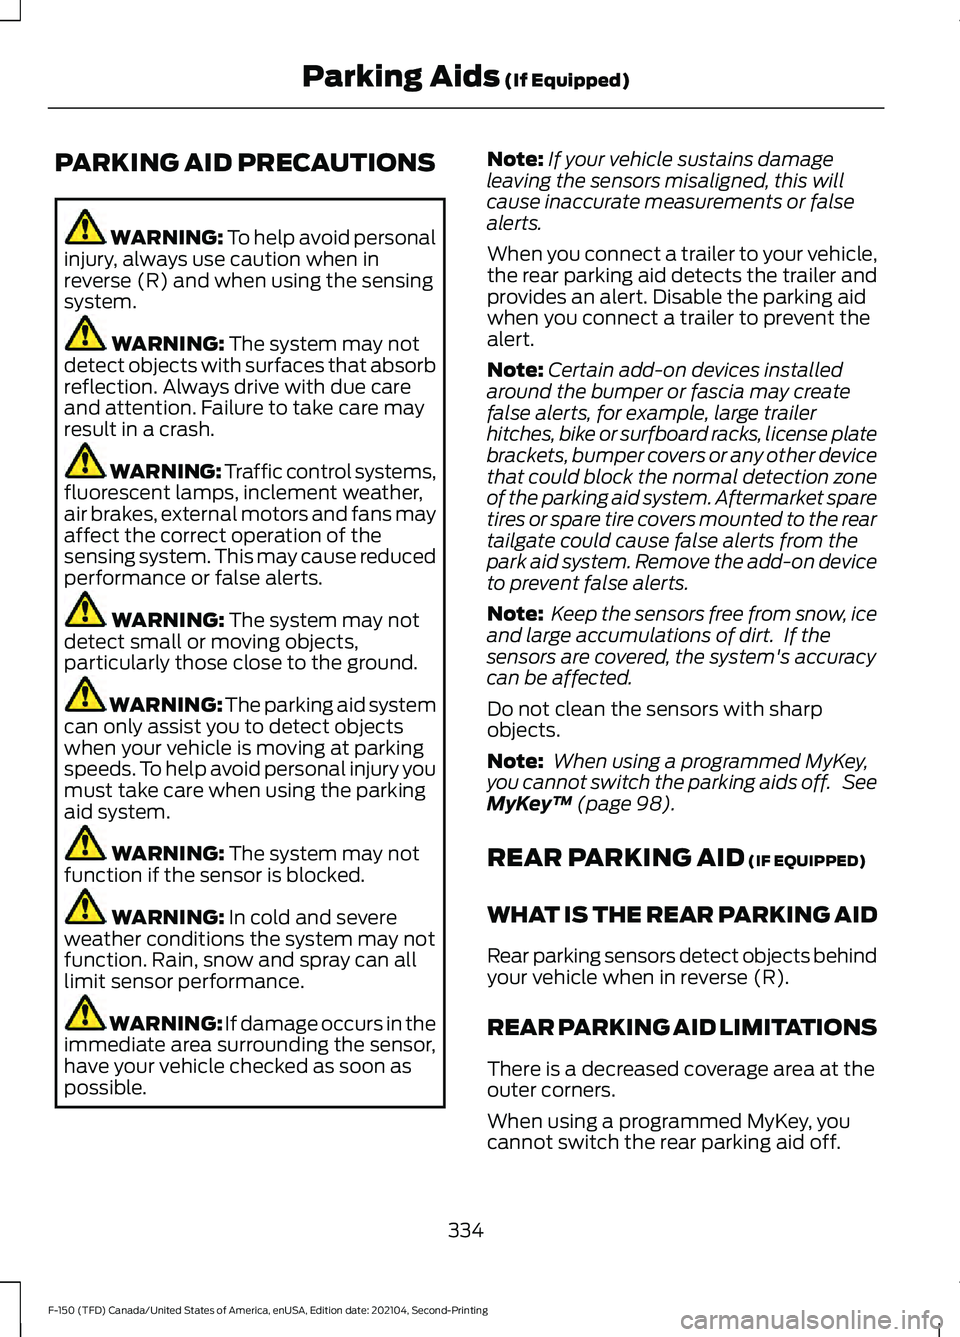 FORD F-150 2021  Owners Manual PARKING AID PRECAUTIONS
WARNING: To help avoid personal
injury, always use caution when in
reverse (R) and when using the sensing
system. WARNING: 
The system may not
detect objects with surfaces that